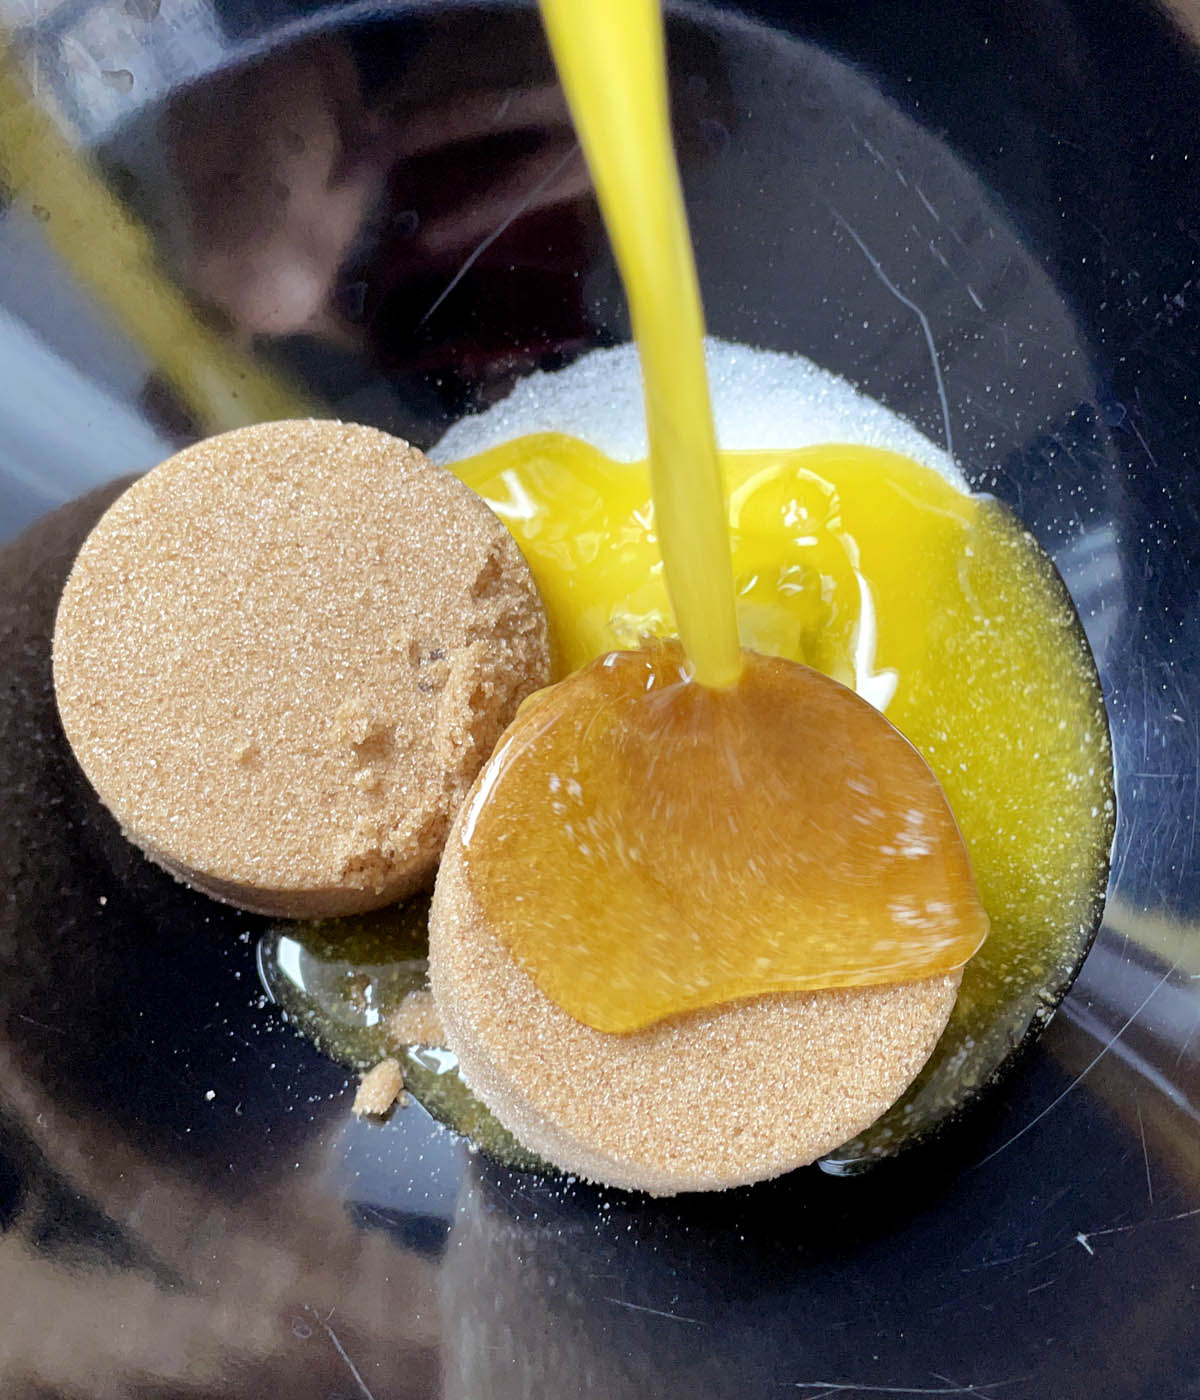 Melted butter being poured into a bowl containing white and brown sugars.